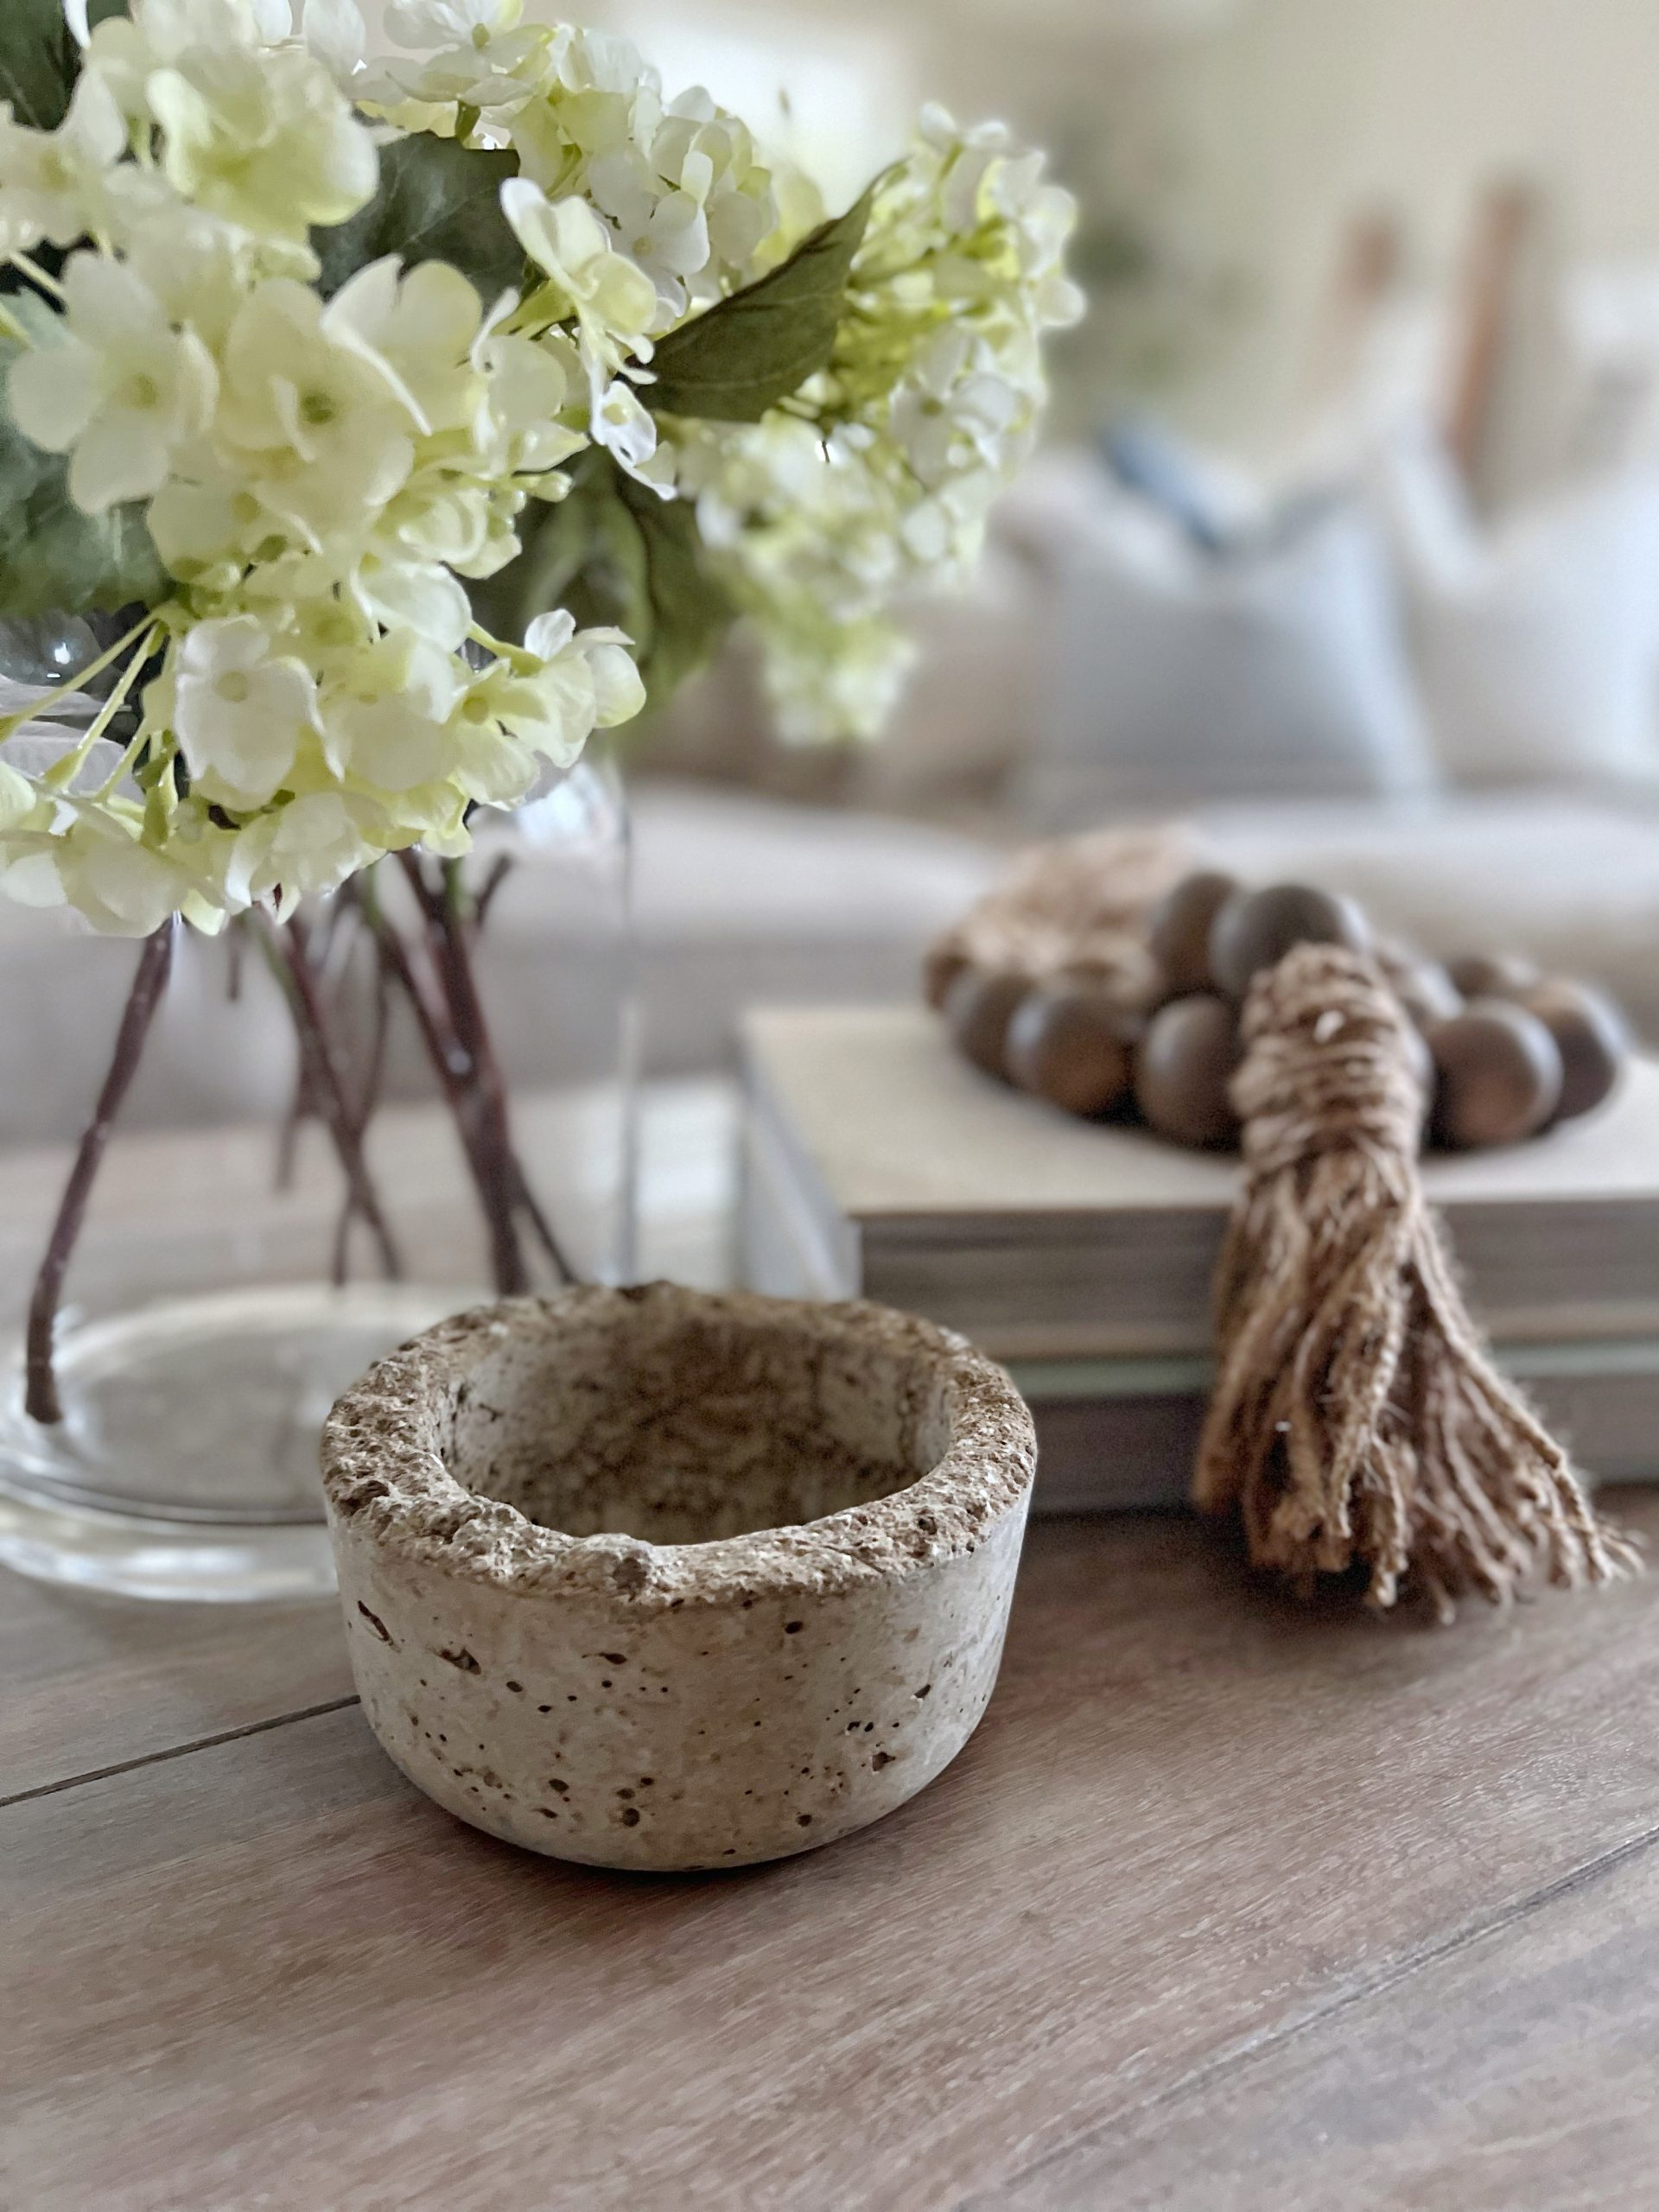 Coffee table centerpiece for easy spring decorating ideas with glass vase of hydrangeas next to a stack of books and wood bead garland draped over the books. A rustic tiny concrete bowl sits in front. 